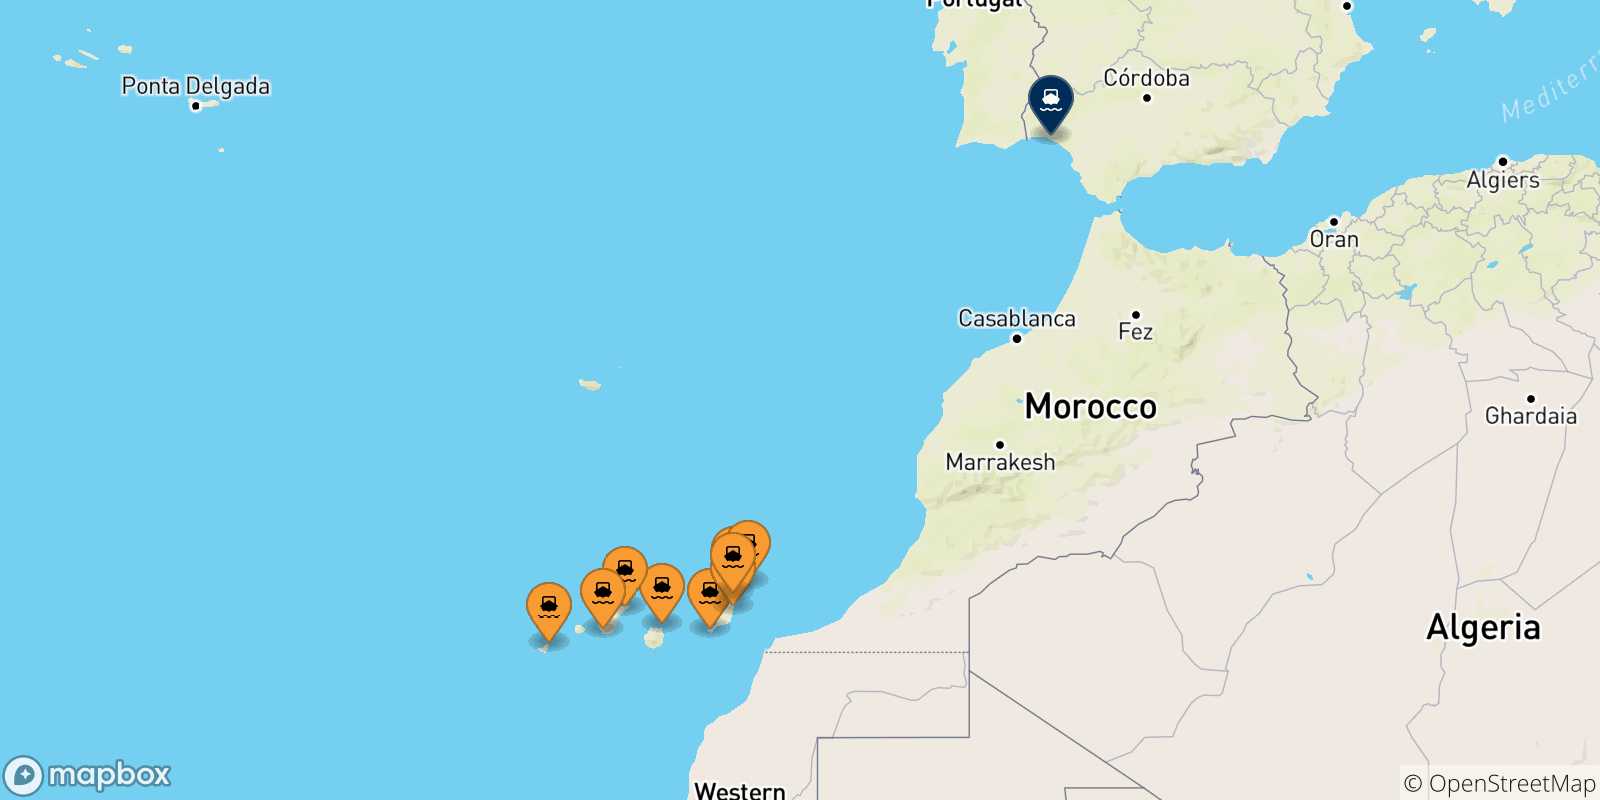 Map of the possible routes between Canary Islands and Spain